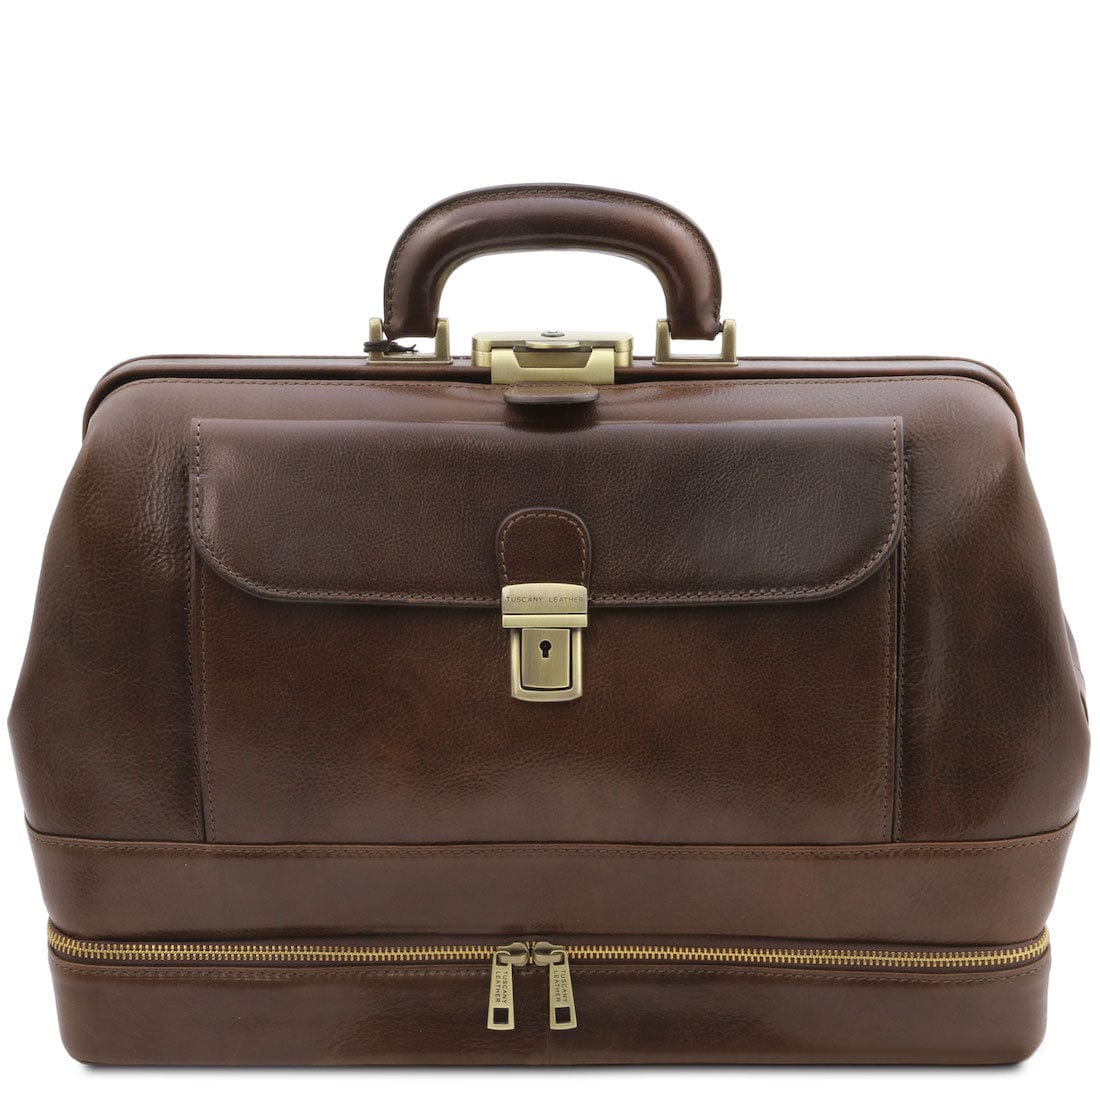 Giotto - Exclusive double-bottom leather doctor bag | TL142071 - Premium Doctor bags - Shop now at San Rocco Italia